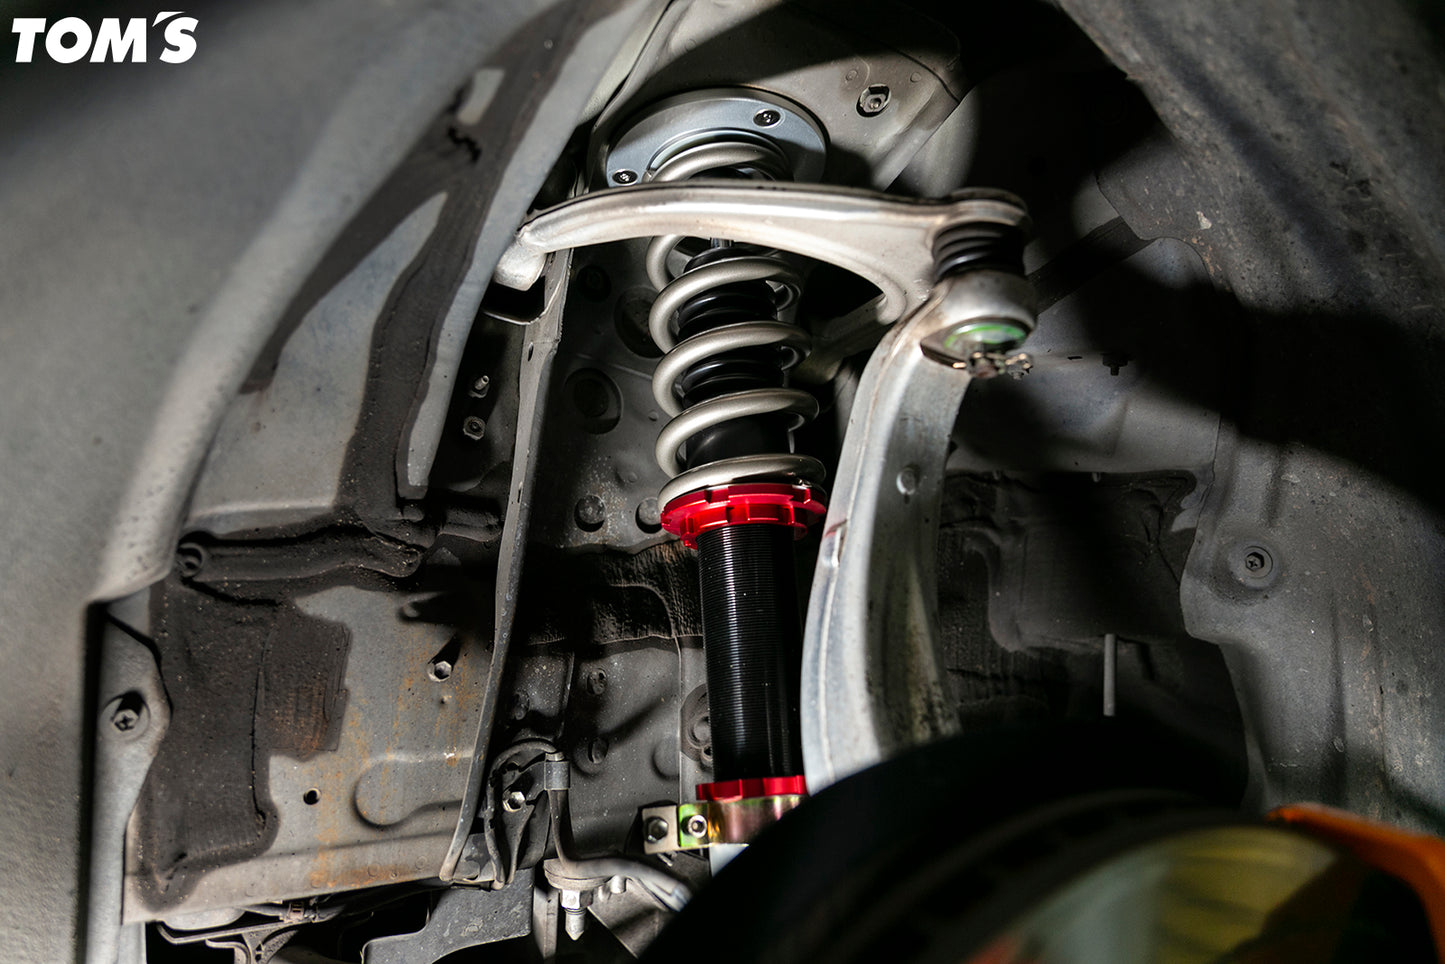 Toms Racing Suspension For Lexus RCF/GSF